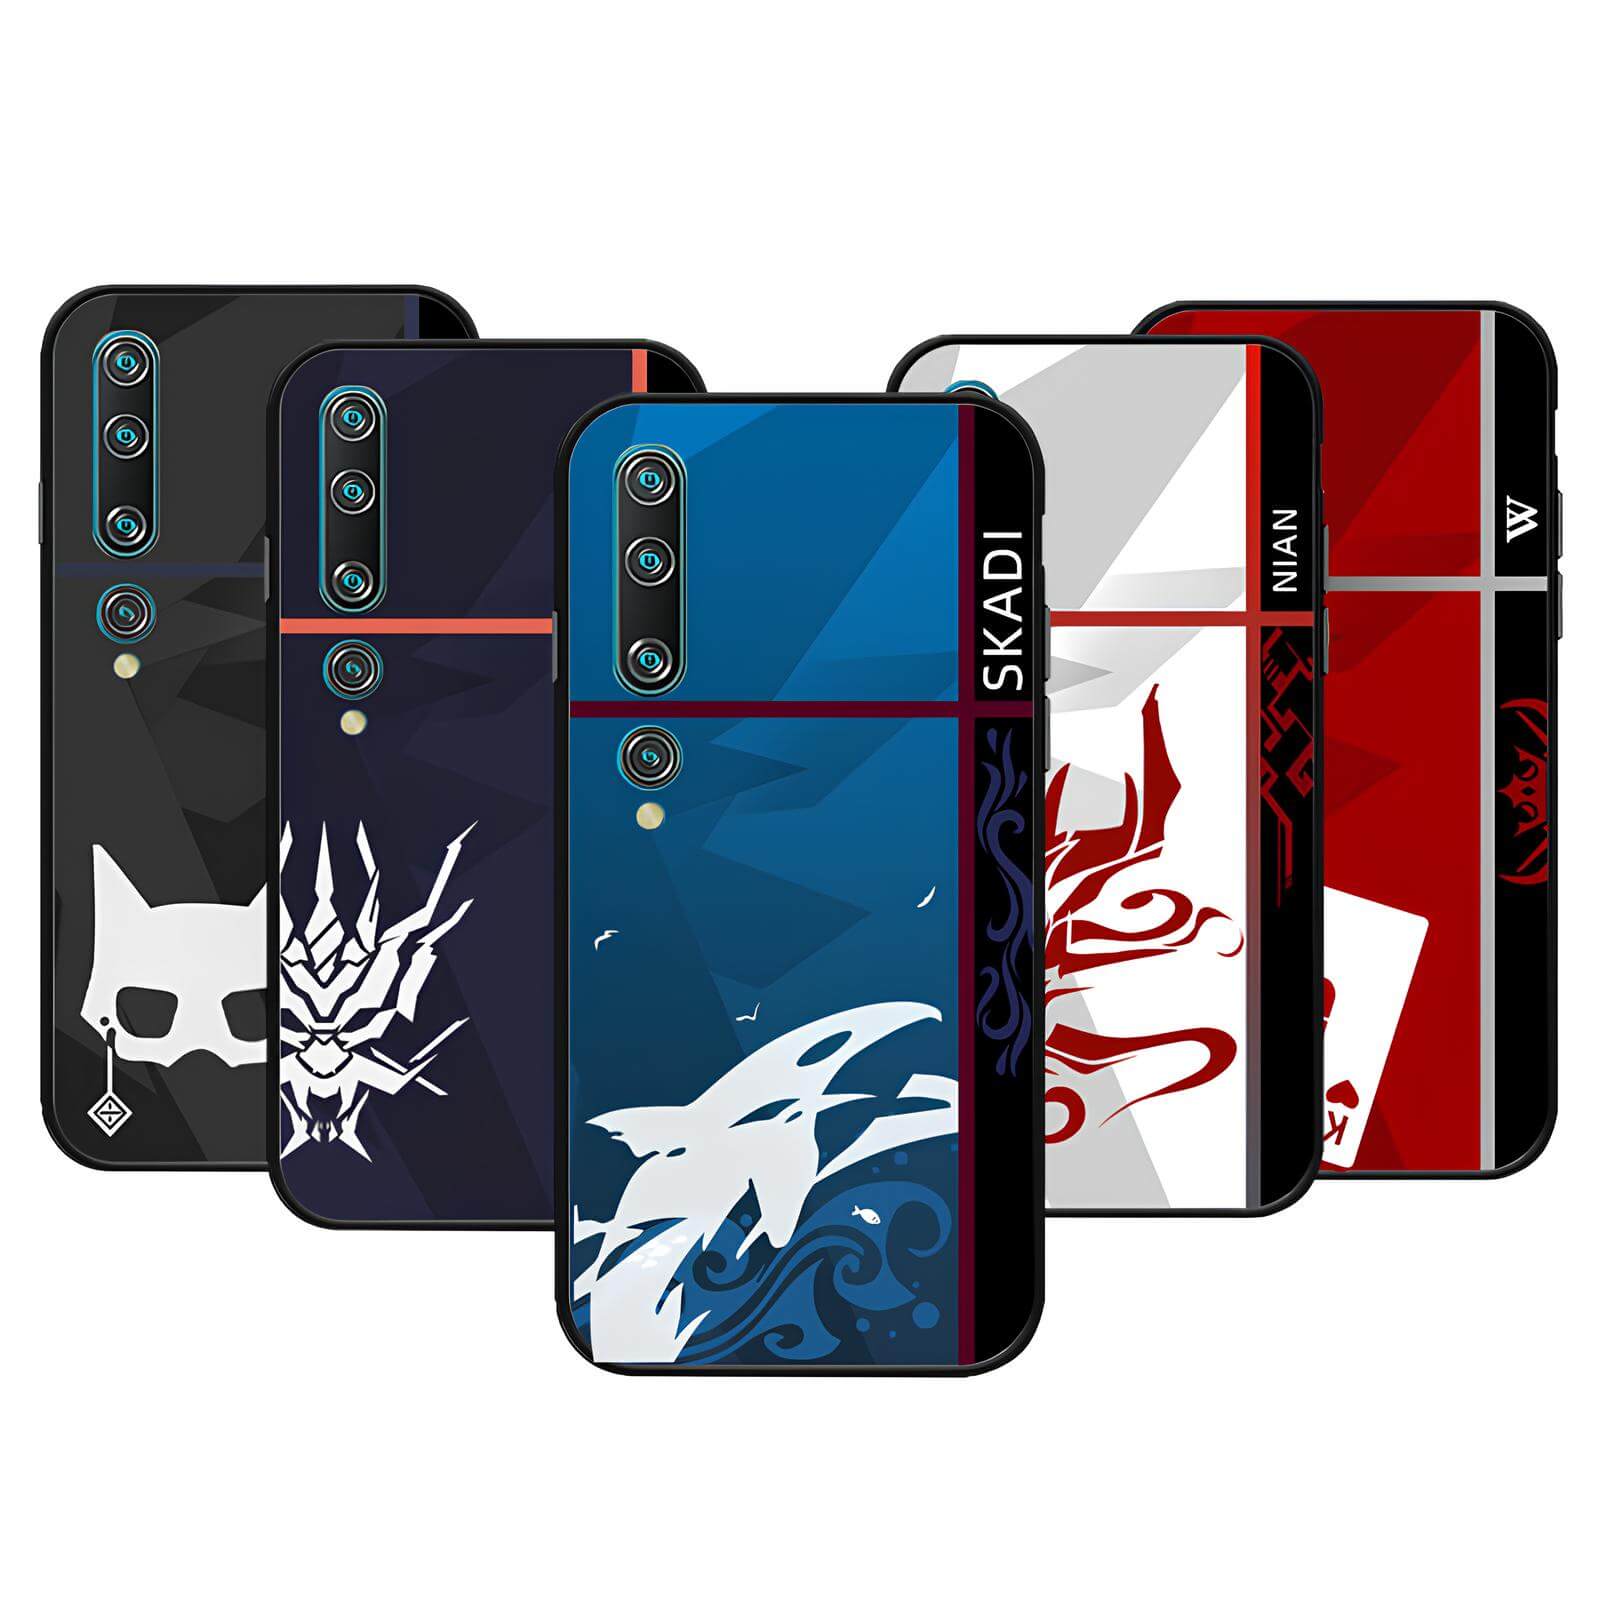 Arknights character icon mobile phone case Series 2